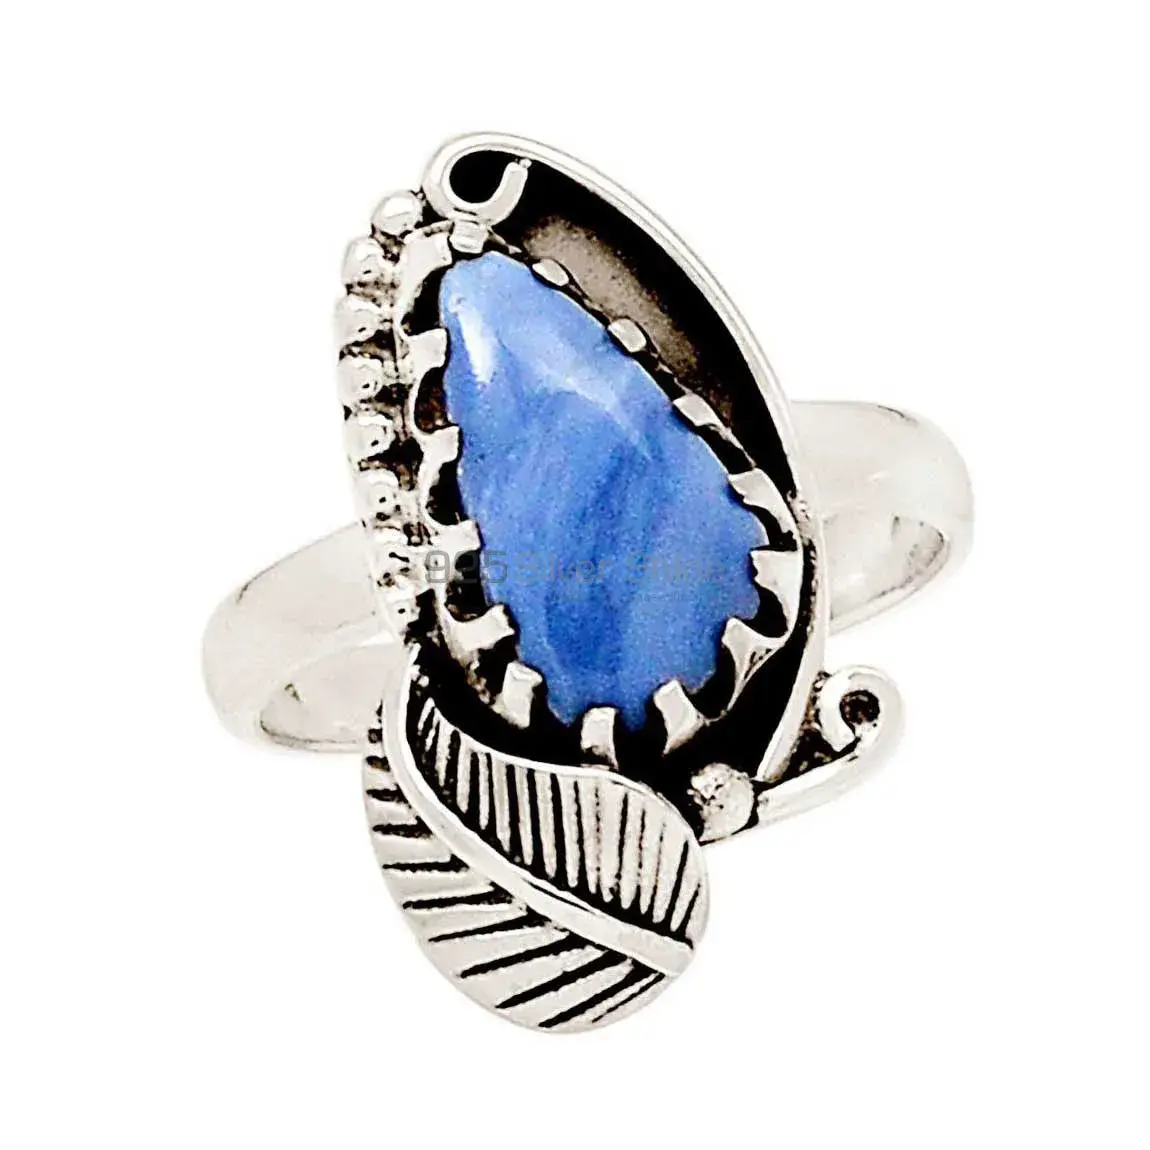 Natural Blue Lace Agate Gemstone Ring In Sterling Silver 925SR2333_0